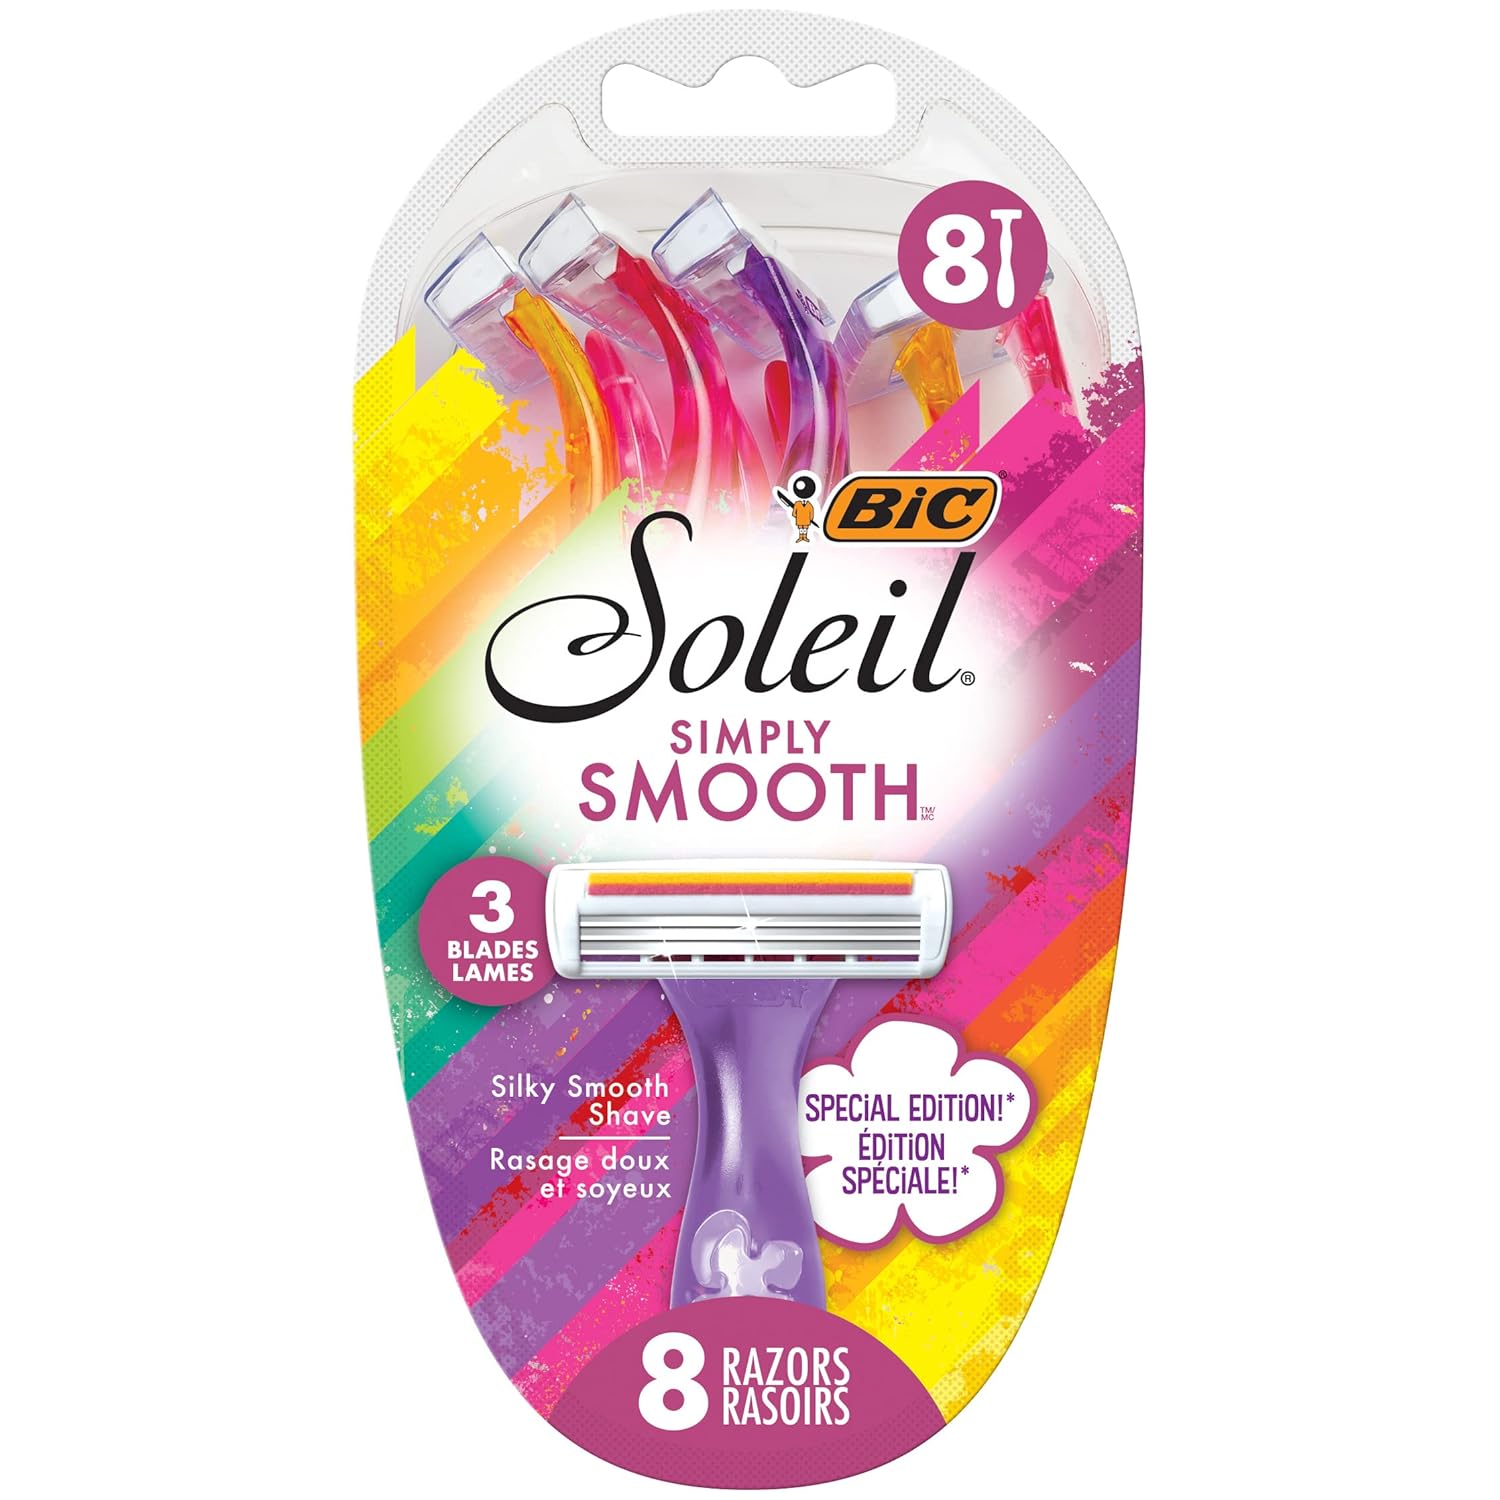 BIC Soleil Simply Smooth Women' Disposable Razors, 3 Blades With Moisture Strip For a Silky Smooth Shave, 8 Piece Razor Set